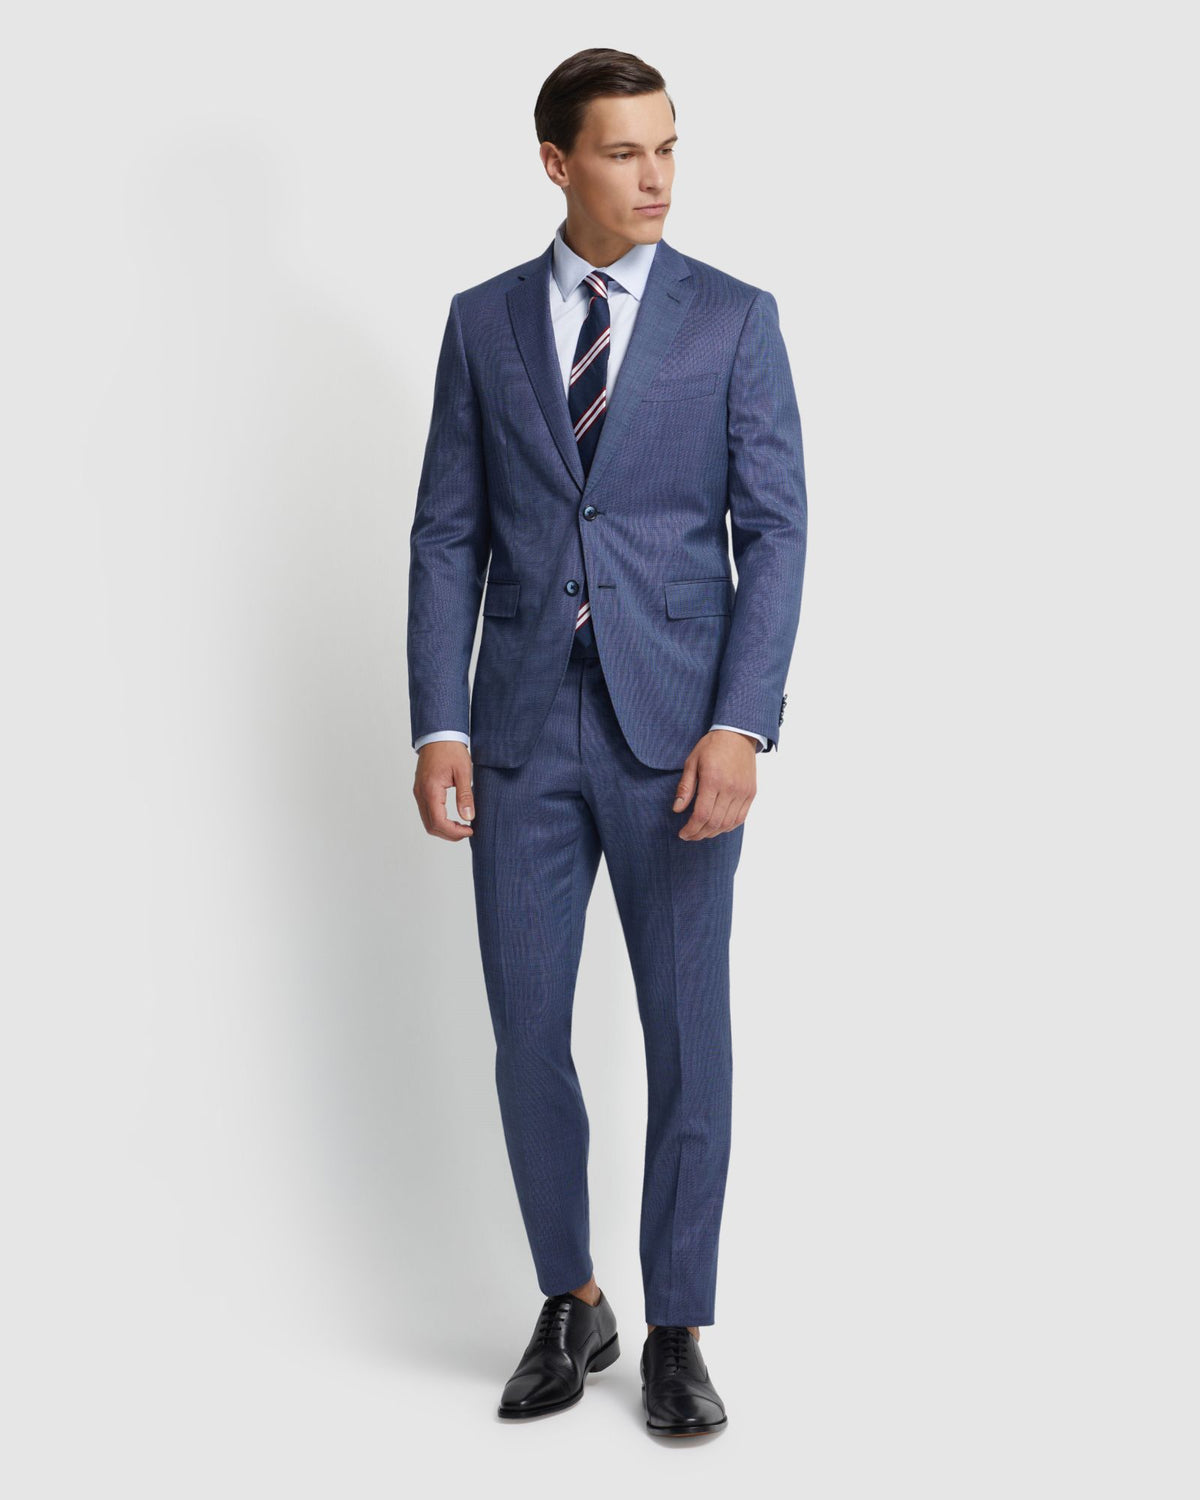 AUDEN WOOL SUIT TOURSERS - AVAILABLE ~ 1-2 weeks MENS SUITS